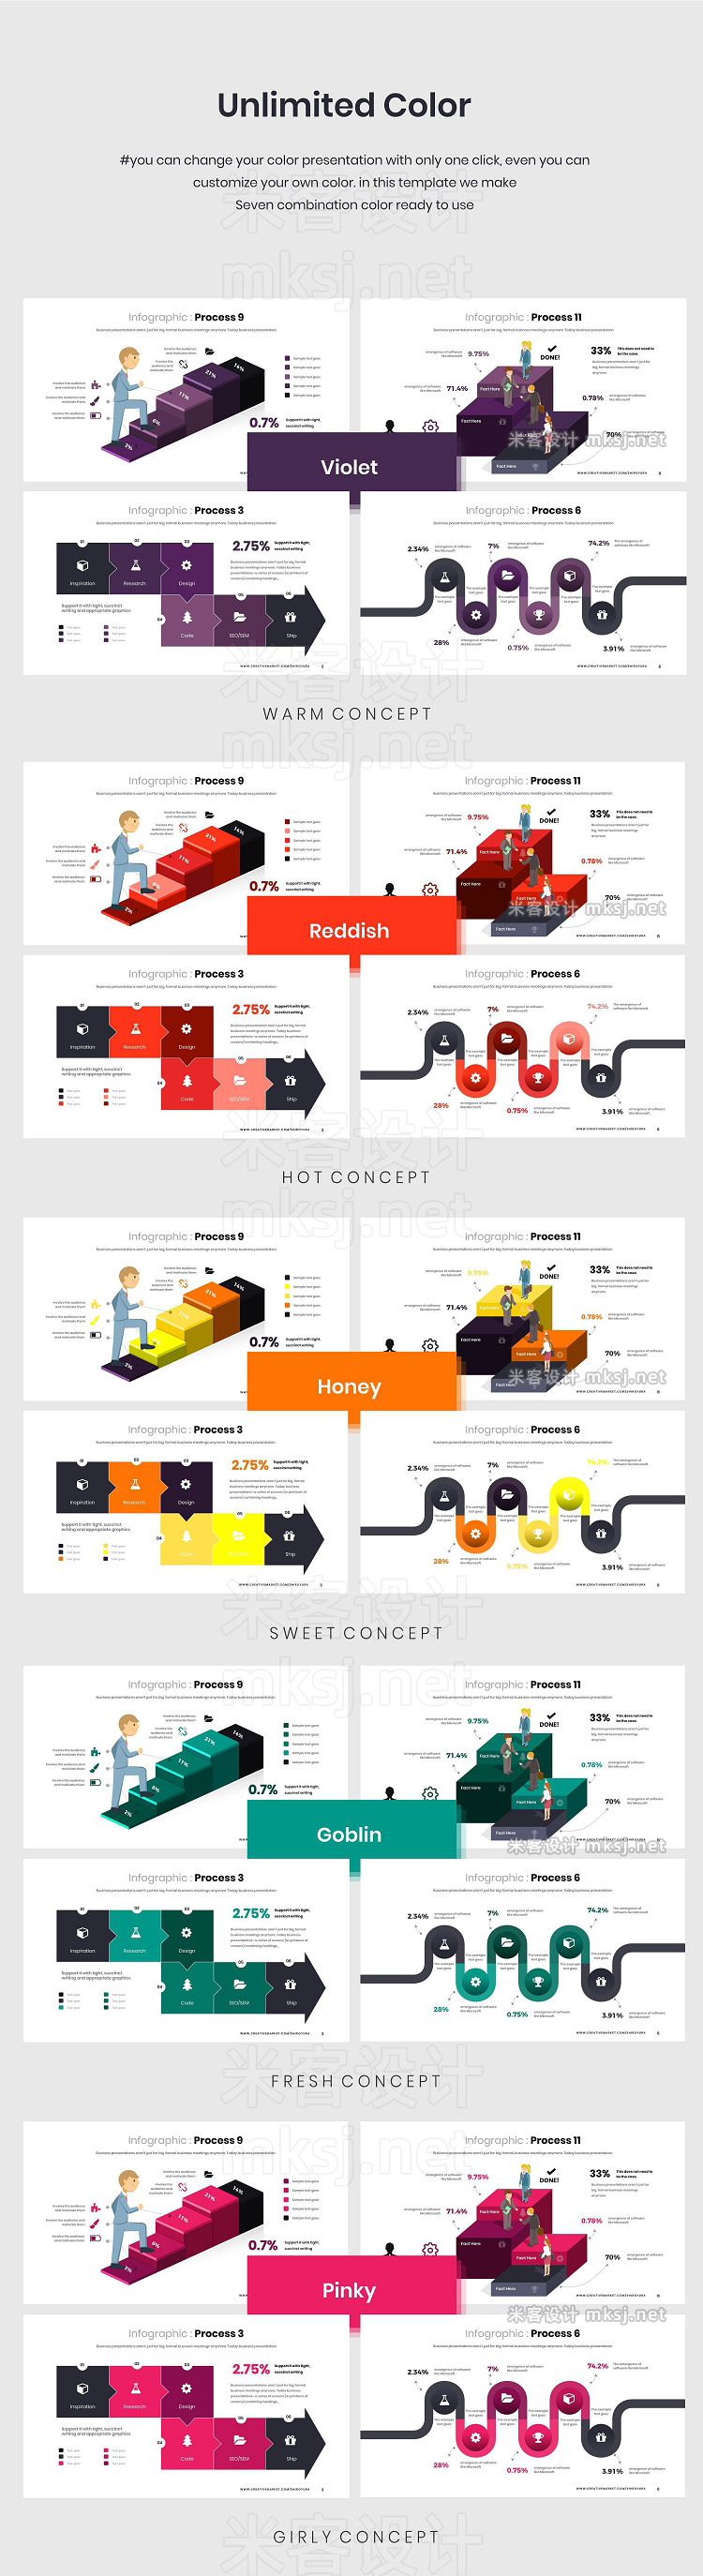 PPT模板 Process Infographic PowerPoint